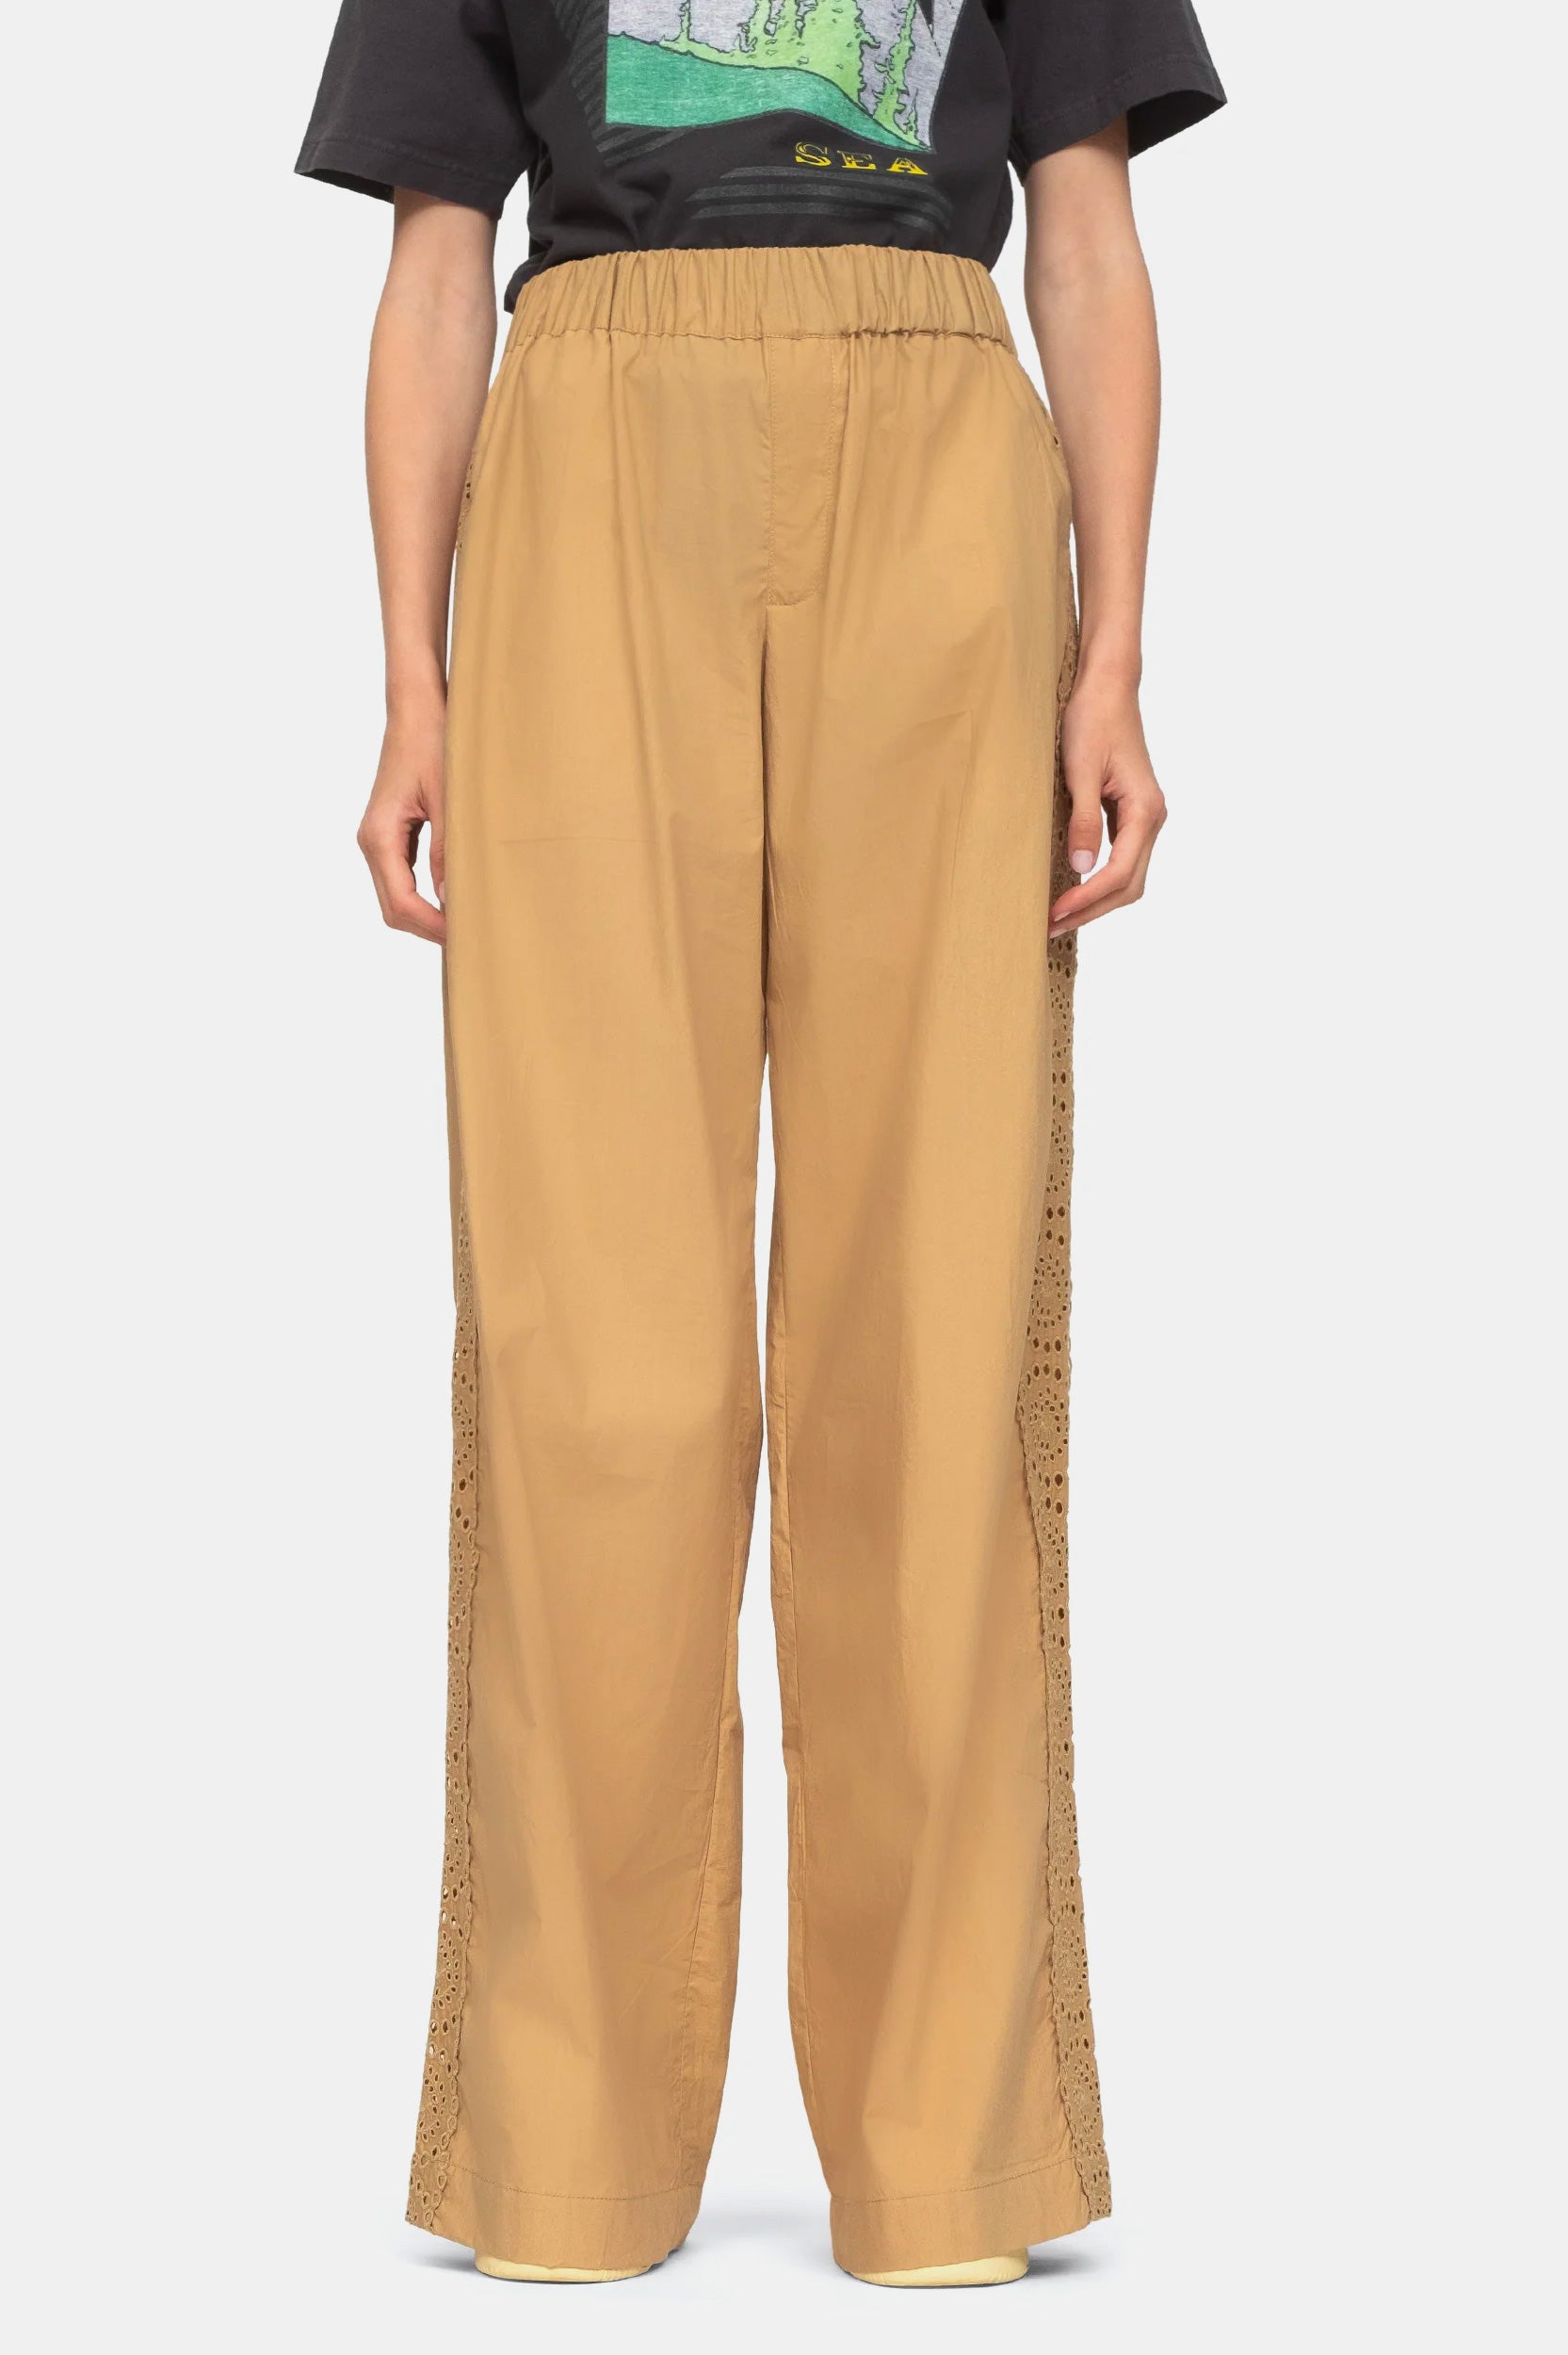 Maeve Eyelet Trim Pants in Chino